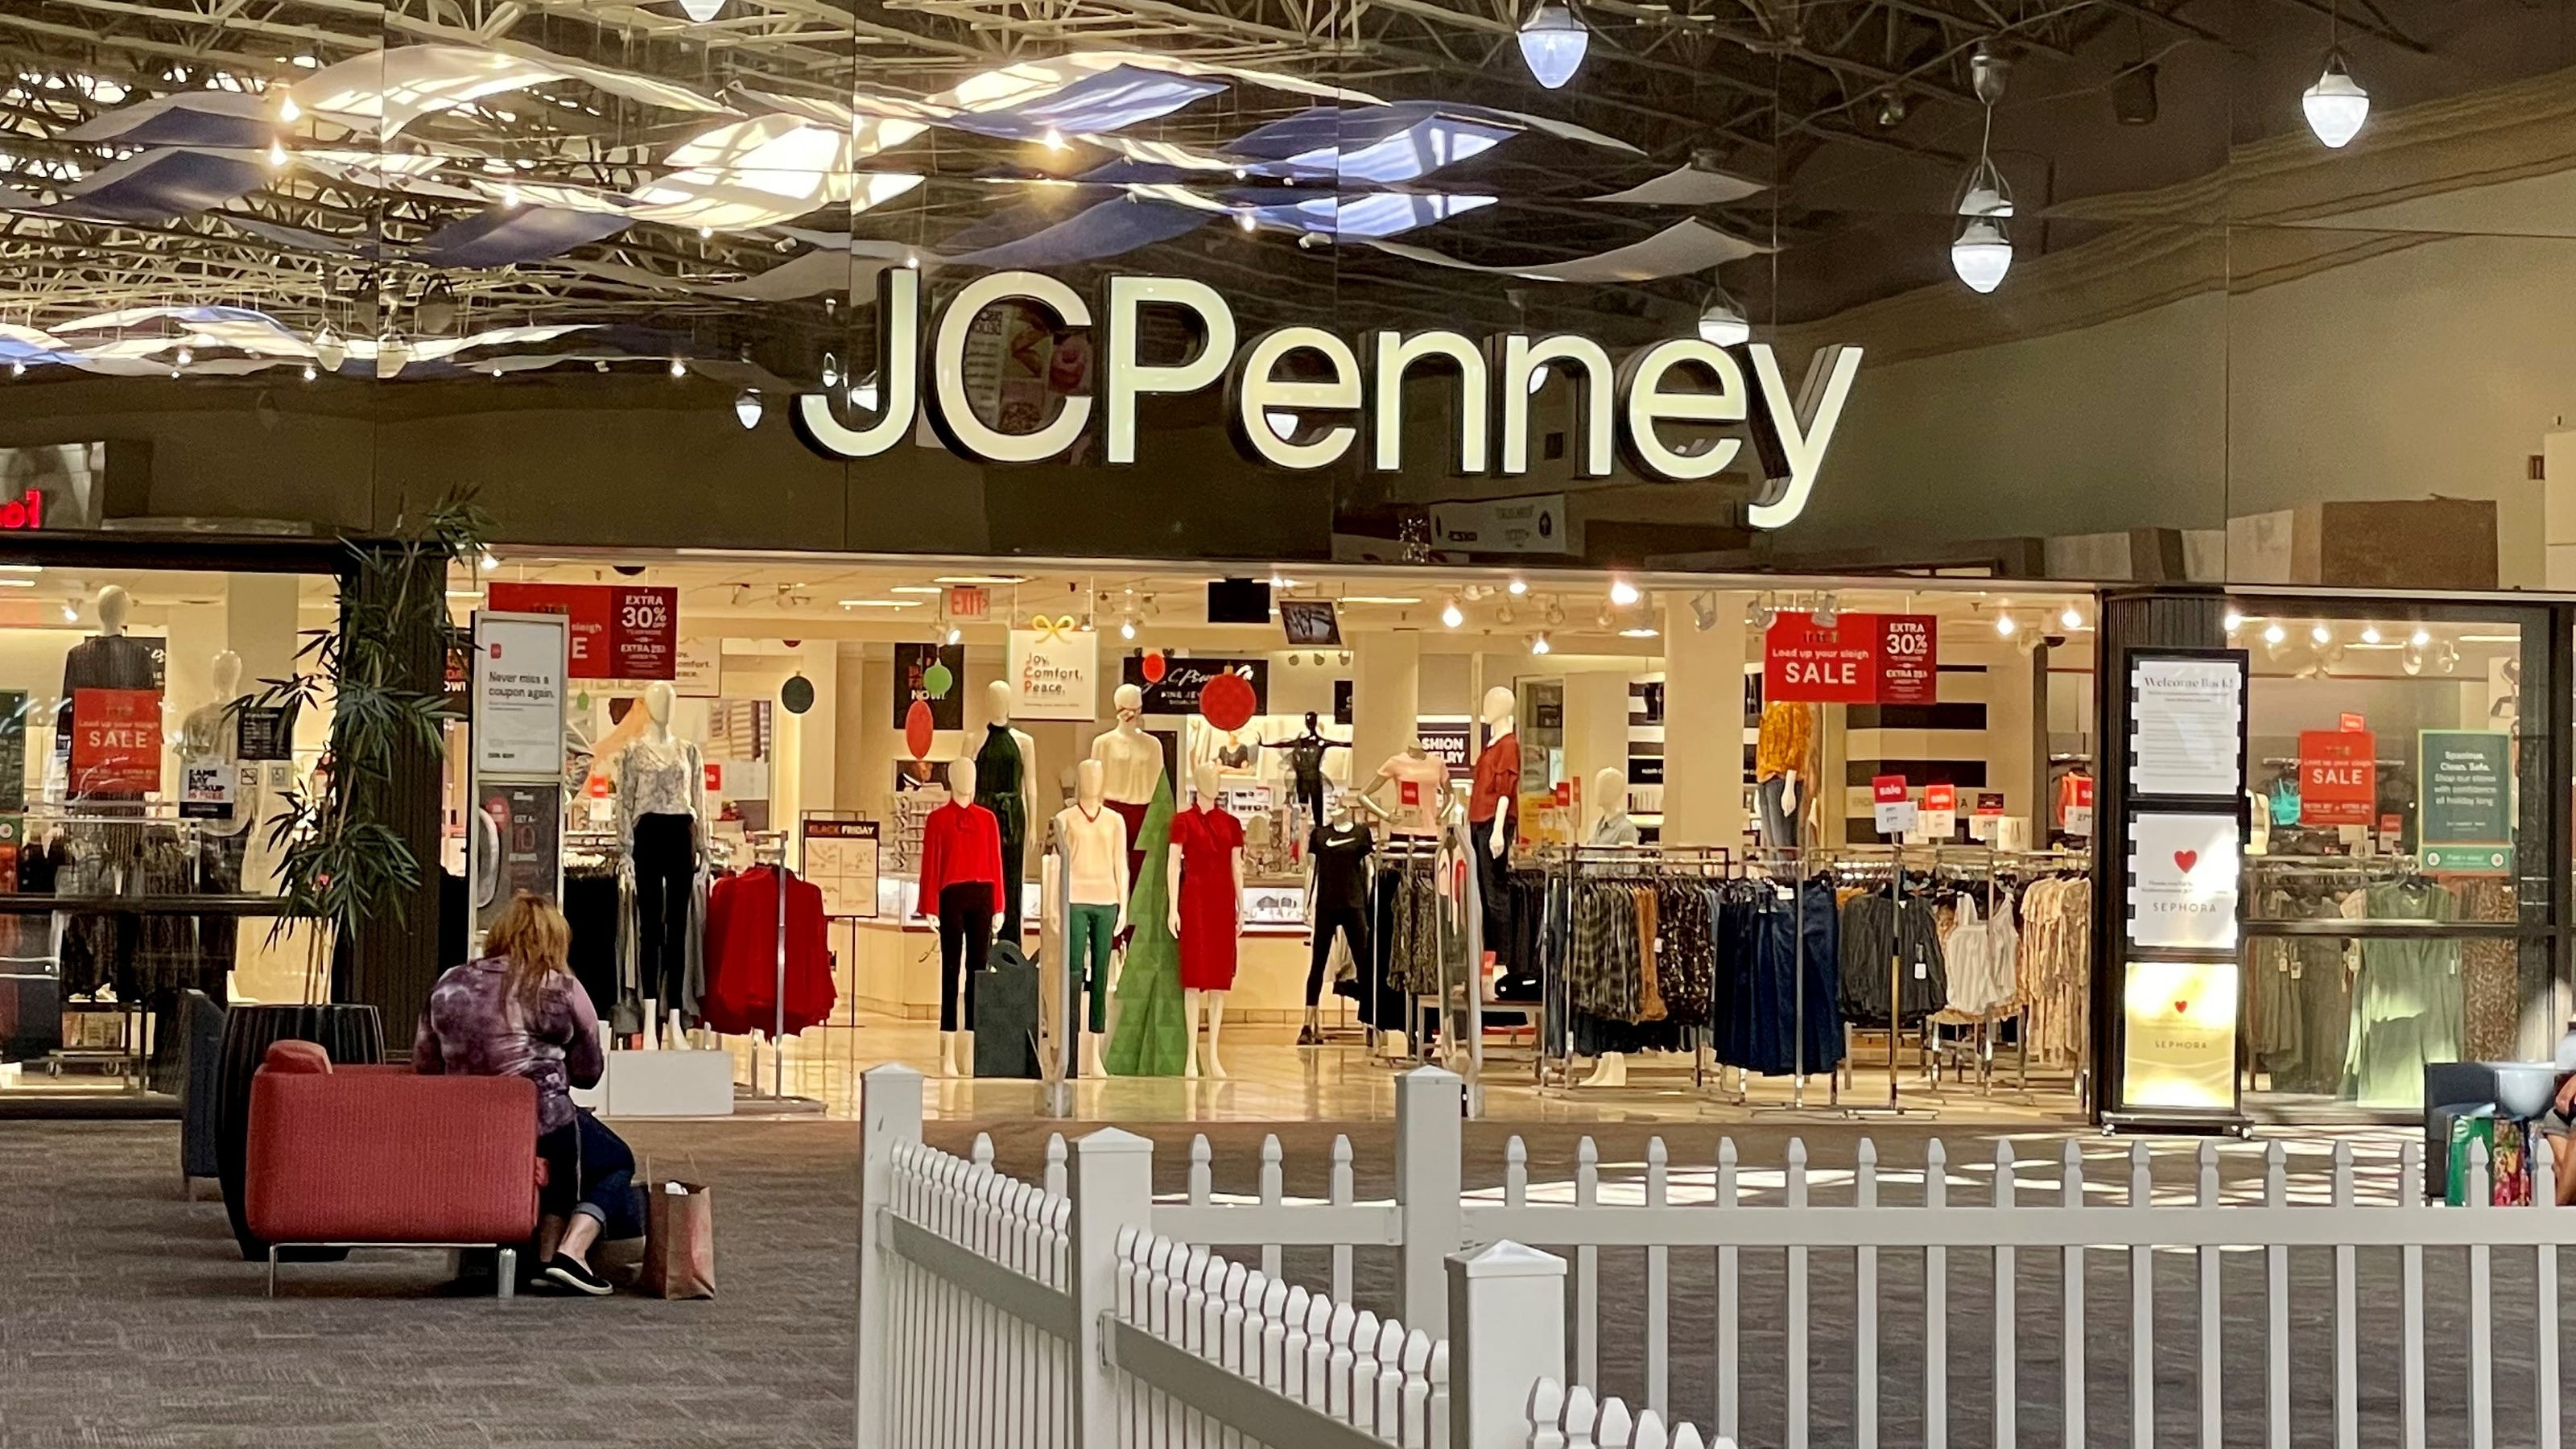 jcpenney mattresses on sale